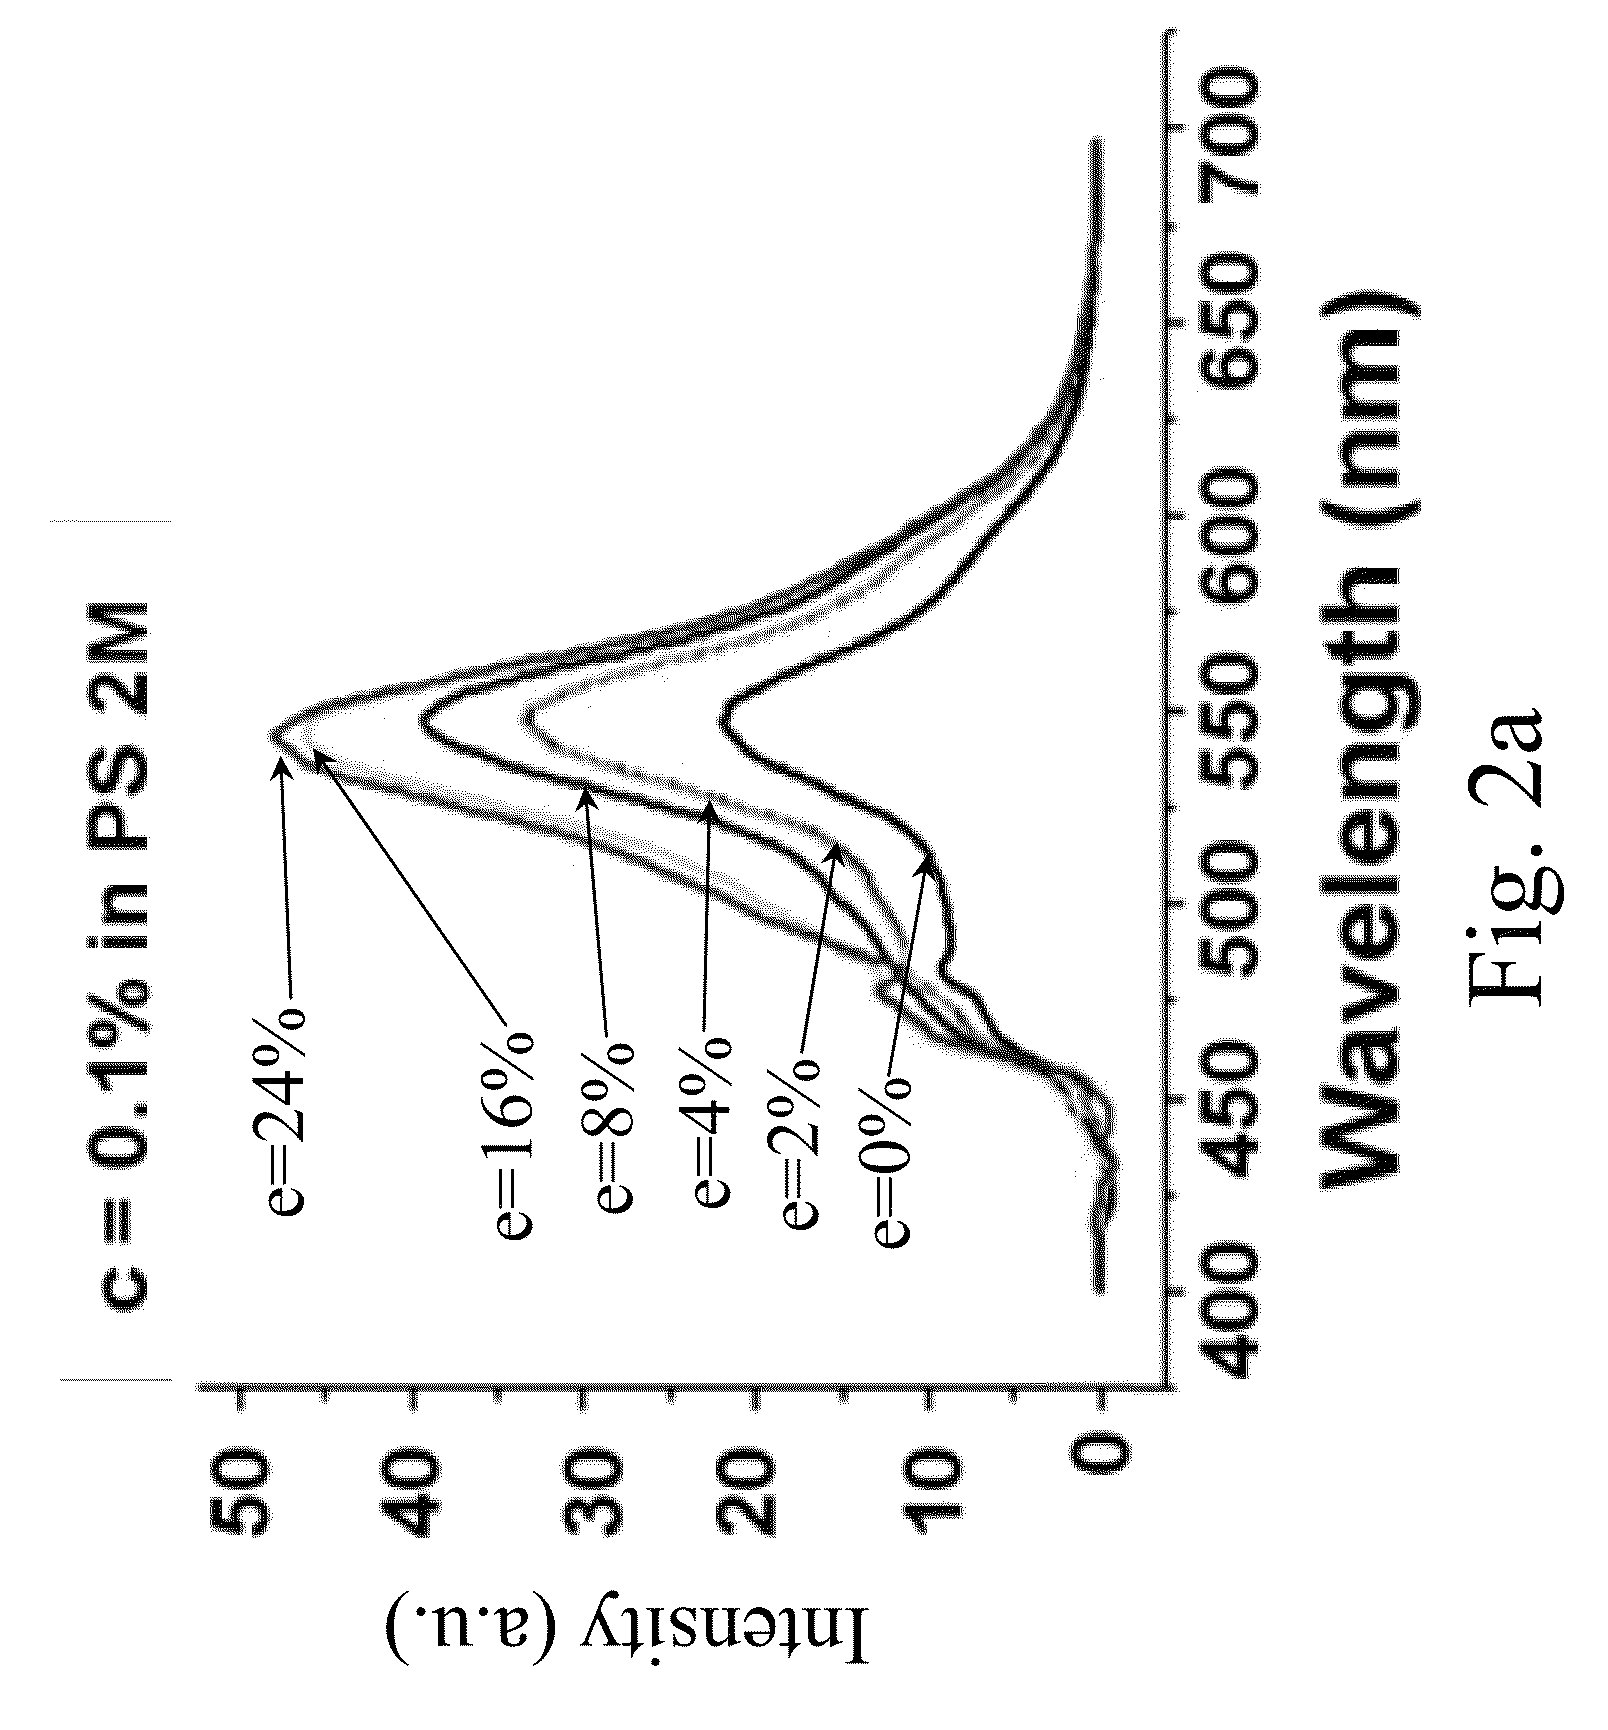 Method for enhancing optoelectronic properties of conjugated polymers